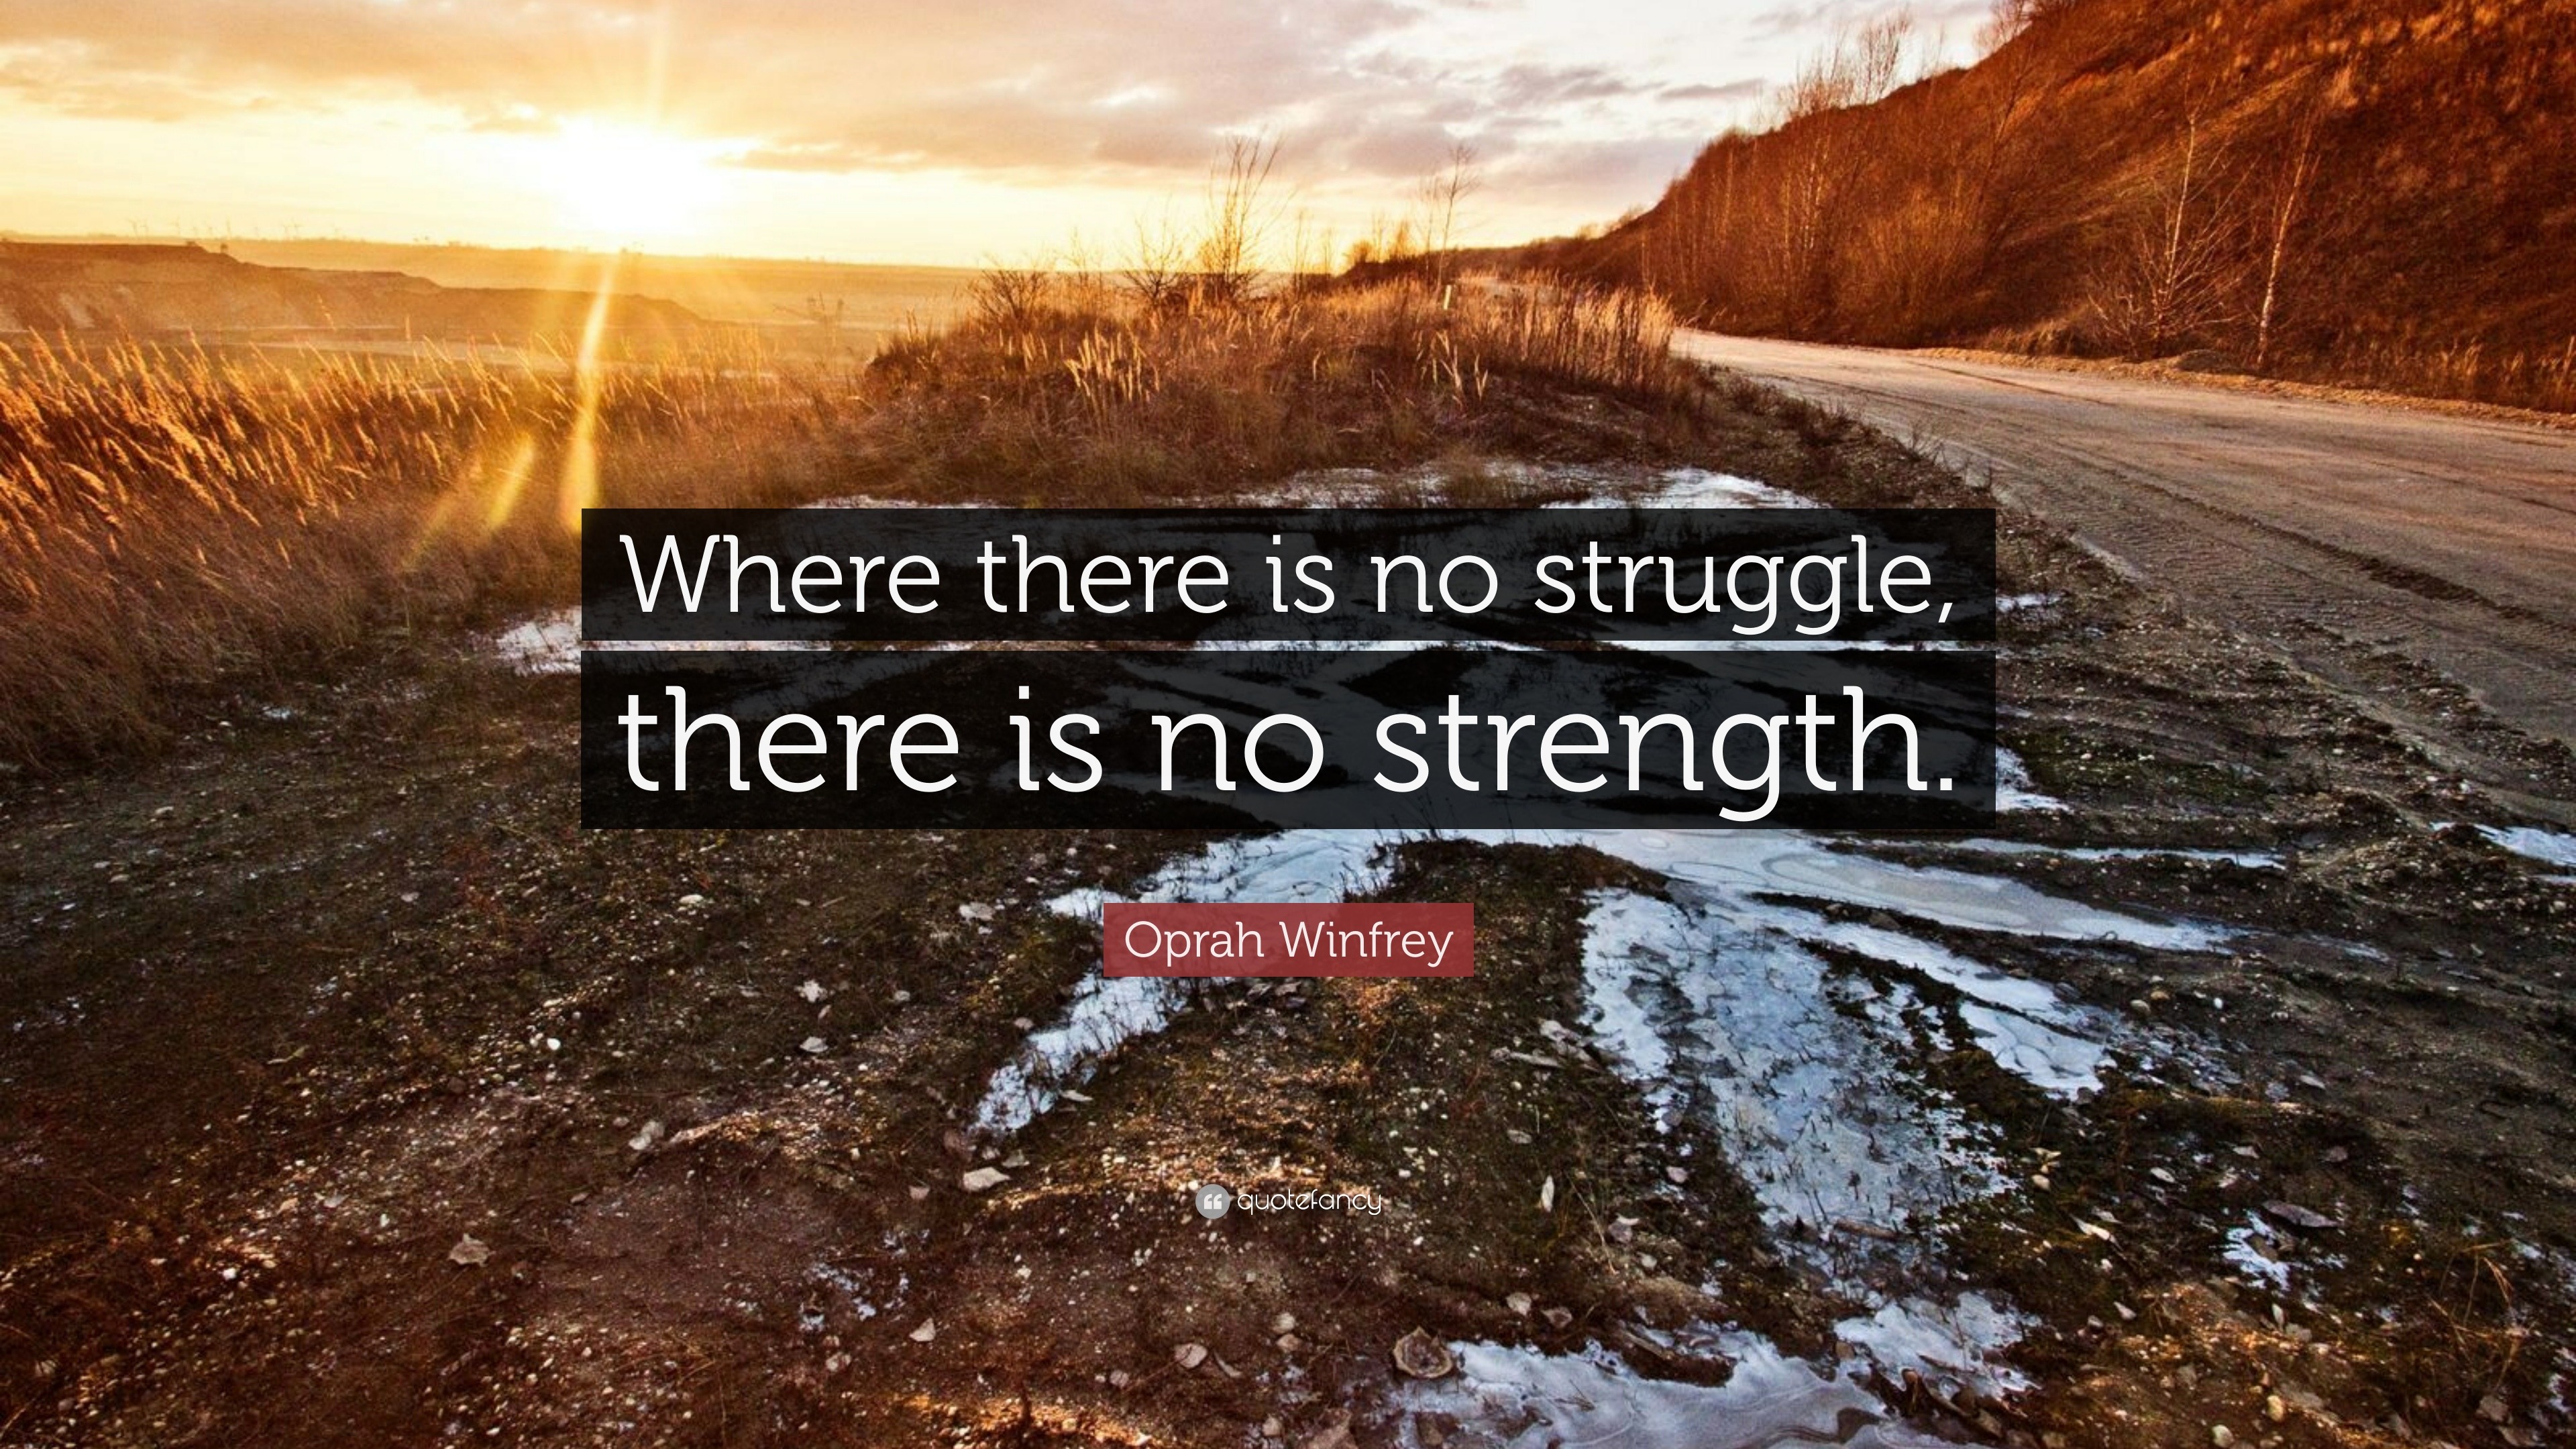 Oprah Winfrey Quote: “Where there is no struggle, there is no strength.”